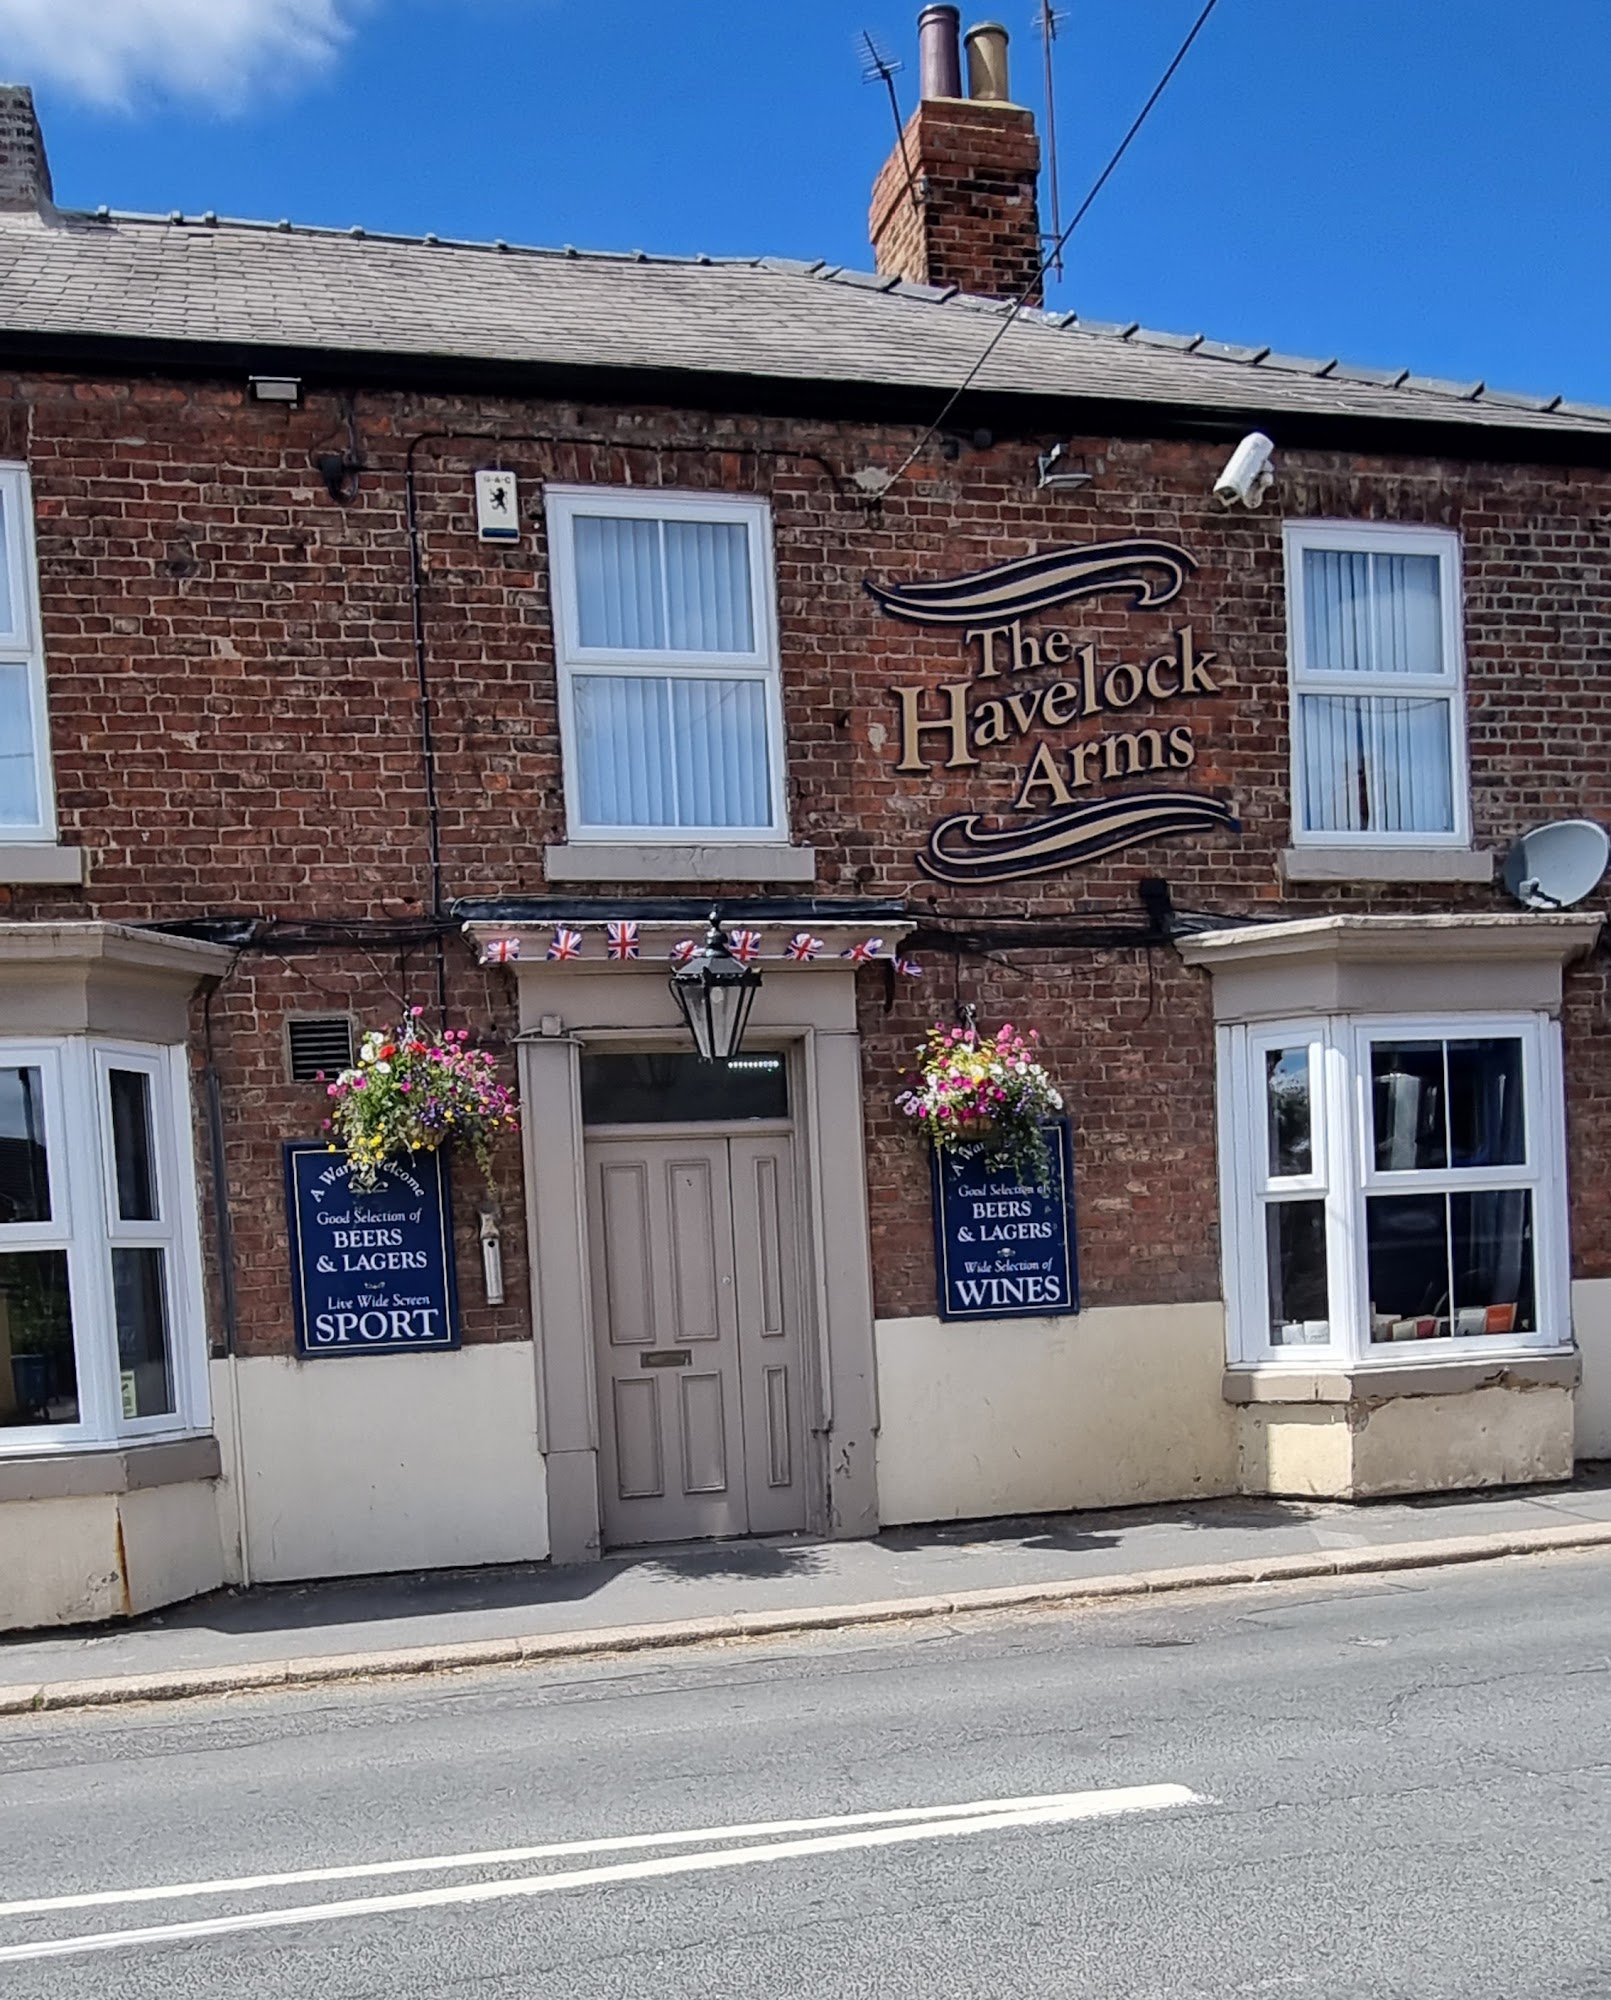 The Havelock Arms